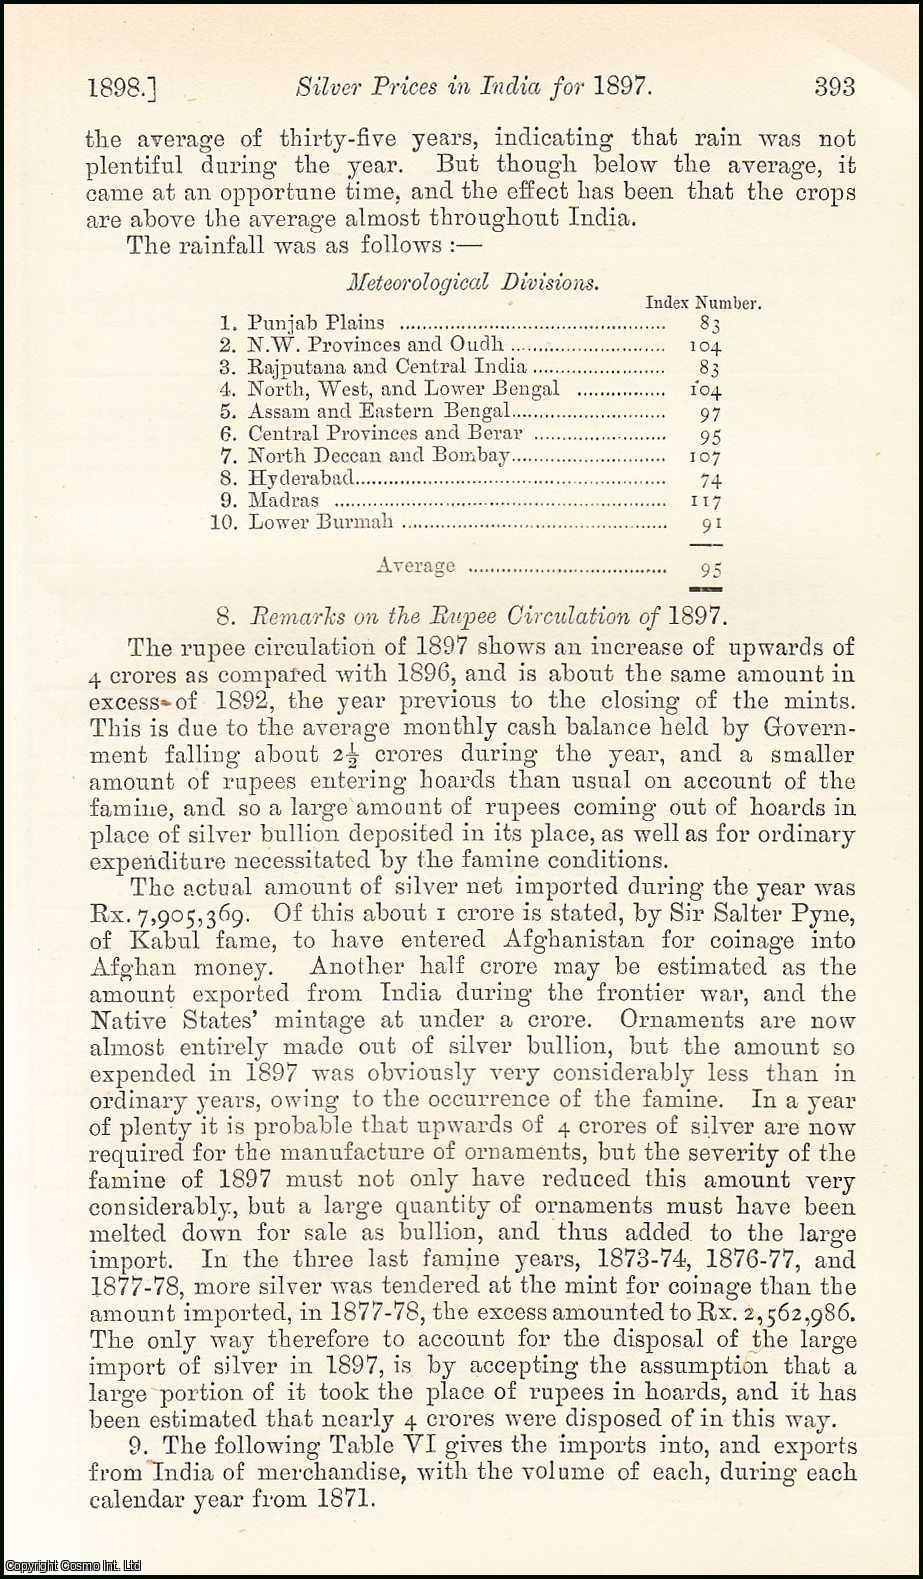 Fred J. Atkinson, F.S.S. - Silver Prices in India for 1897. An uncommon original article from the Journal of the Royal Statistical Society of London, 1898.